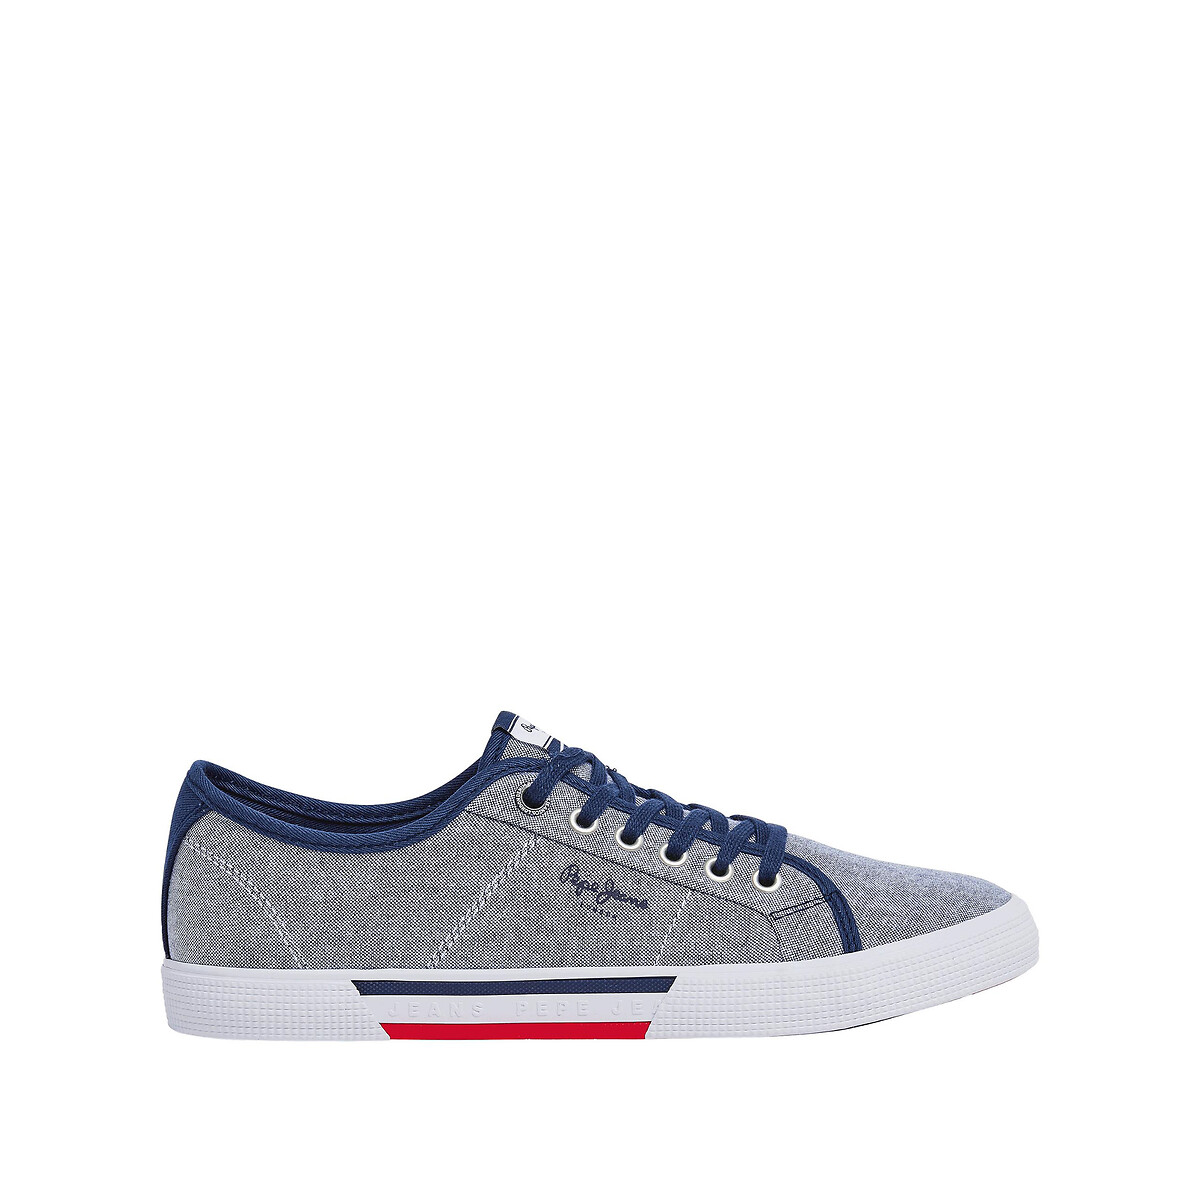 Pepe Jeans white sneaker PLS31486 | IzyShoes and Accessories